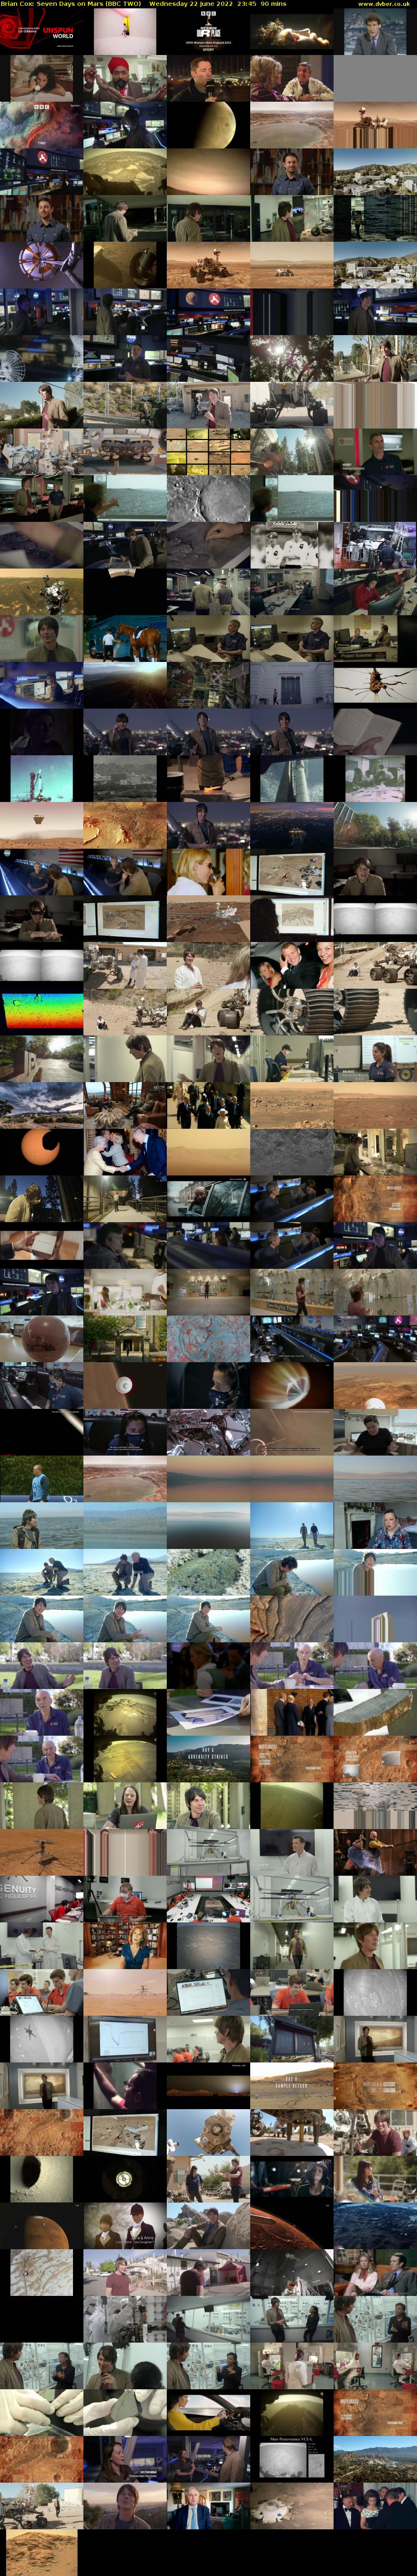 Brian Cox: Seven Days on Mars (BBC TWO) Wednesday 22 June 2022 23:45 - 01:15